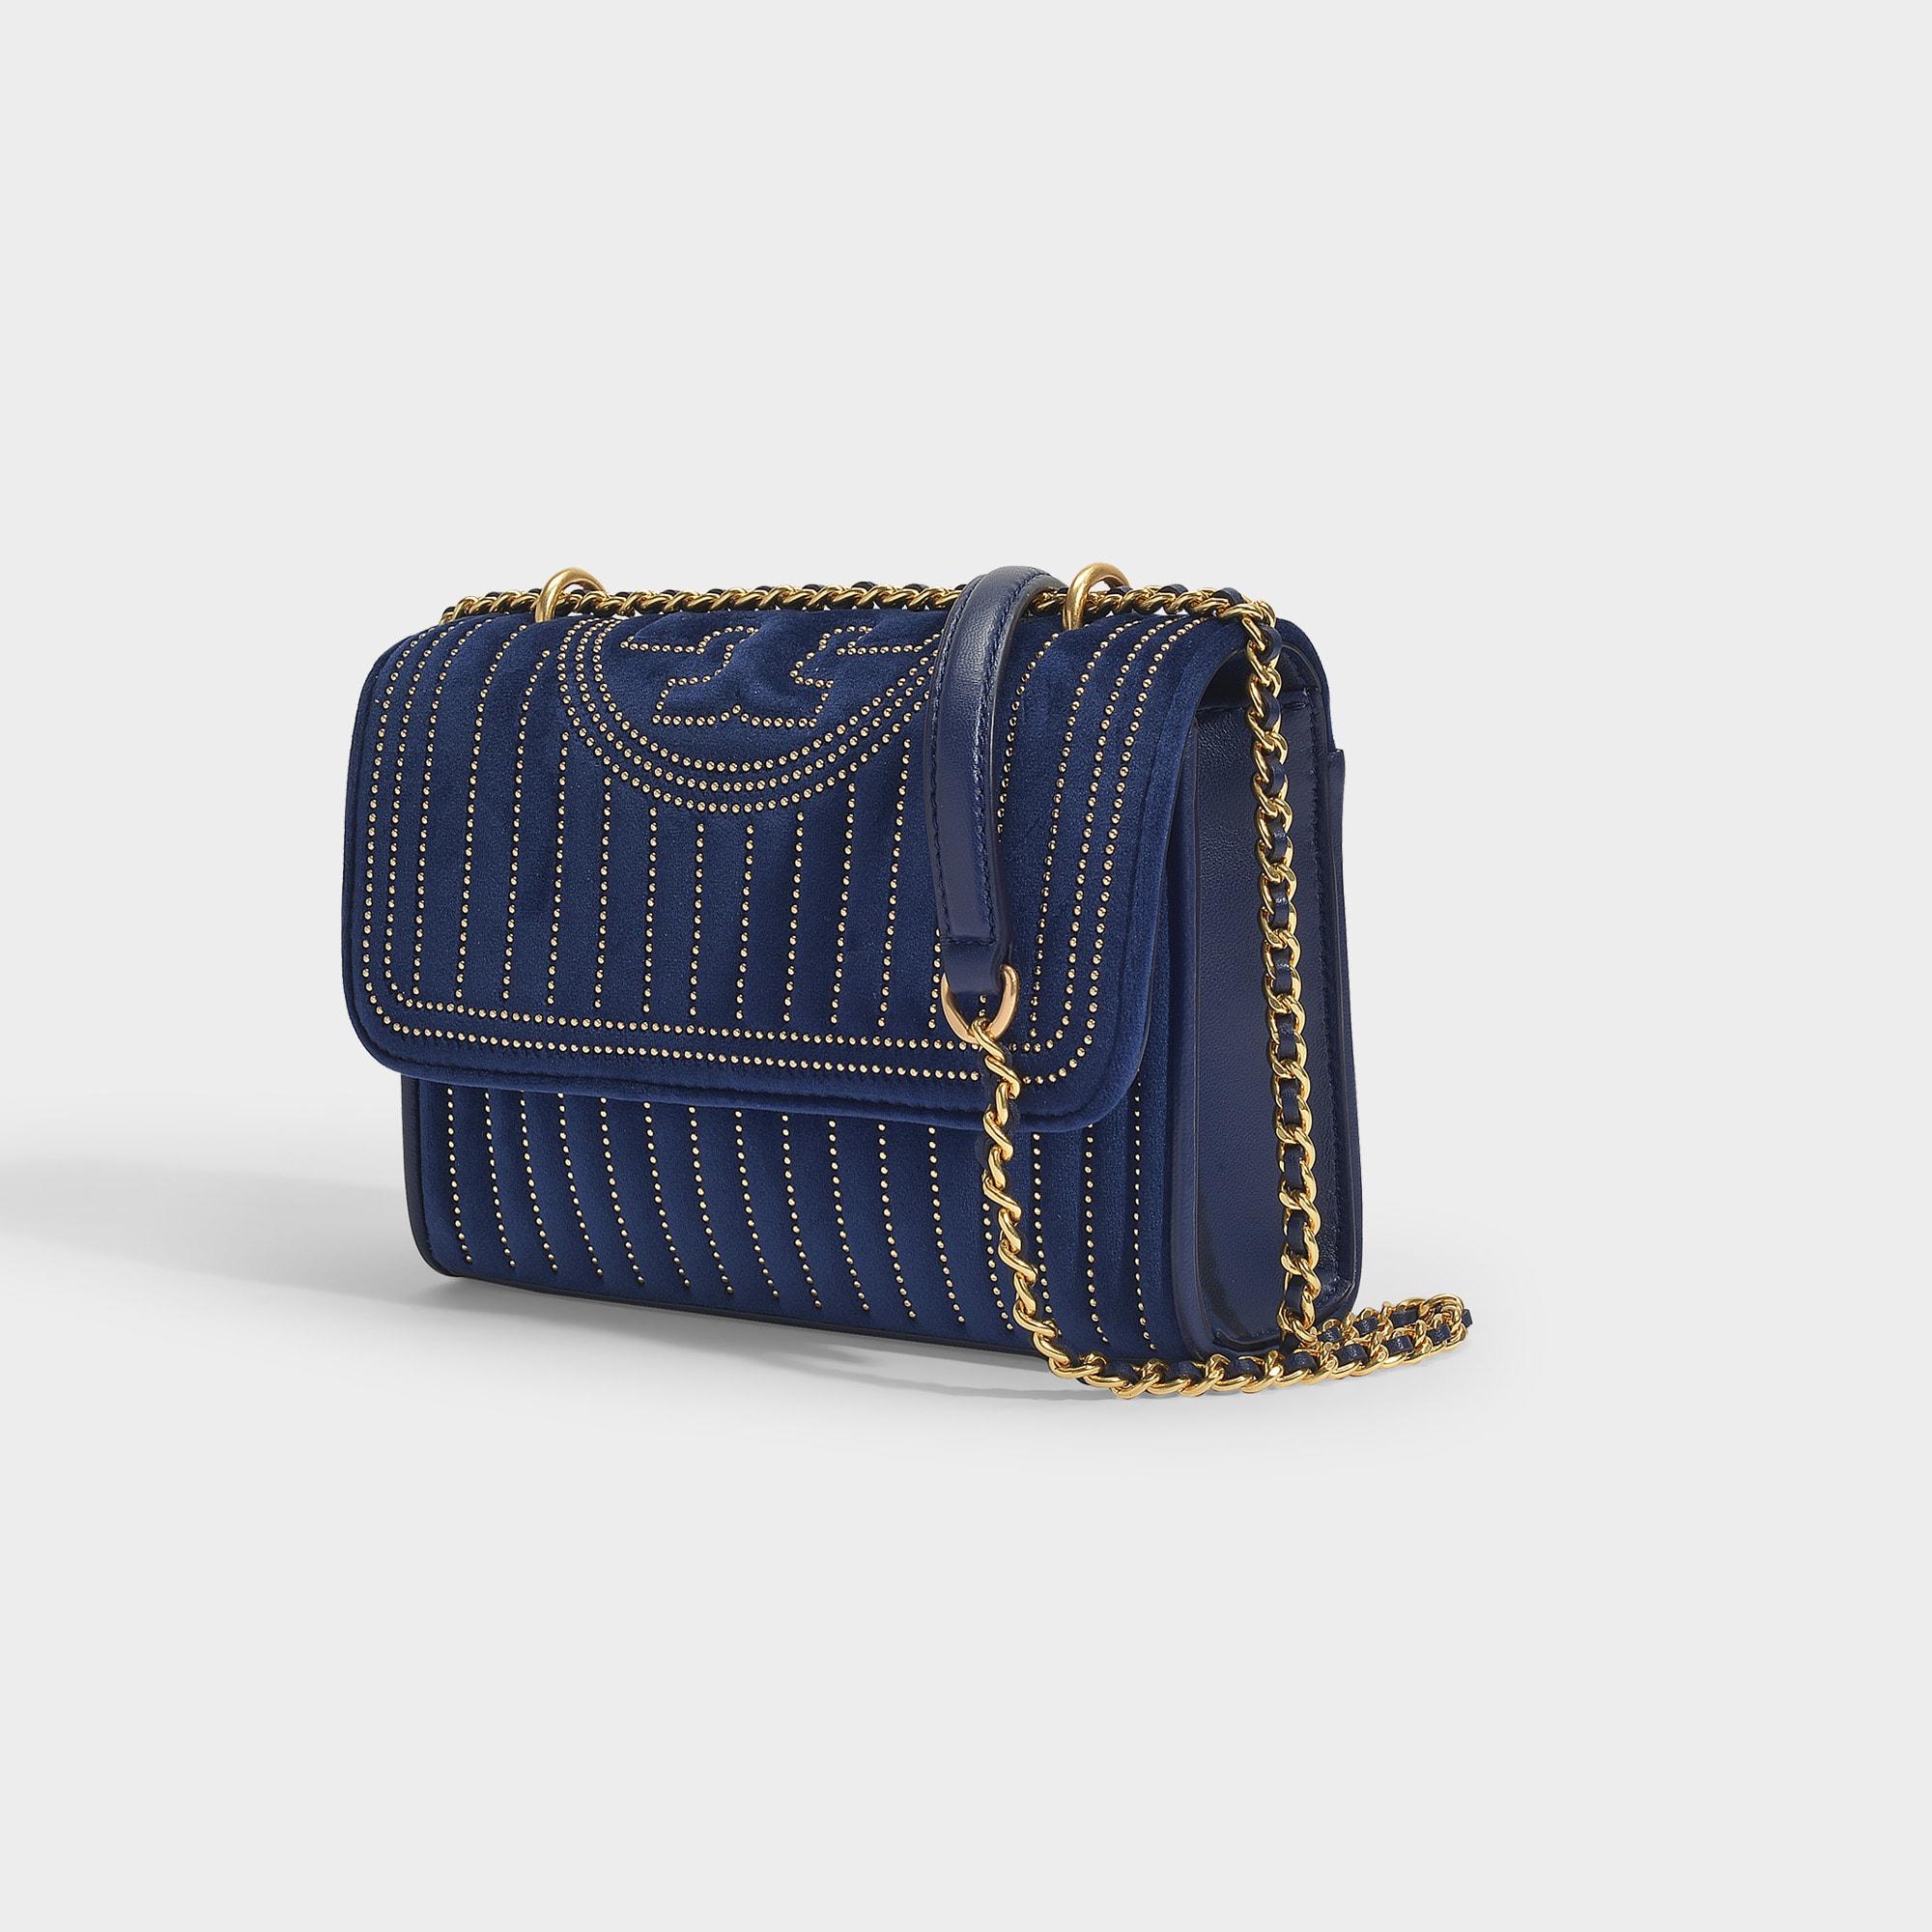 Tory Burch Small Fleming Convertible Shoulder Bag in Blue